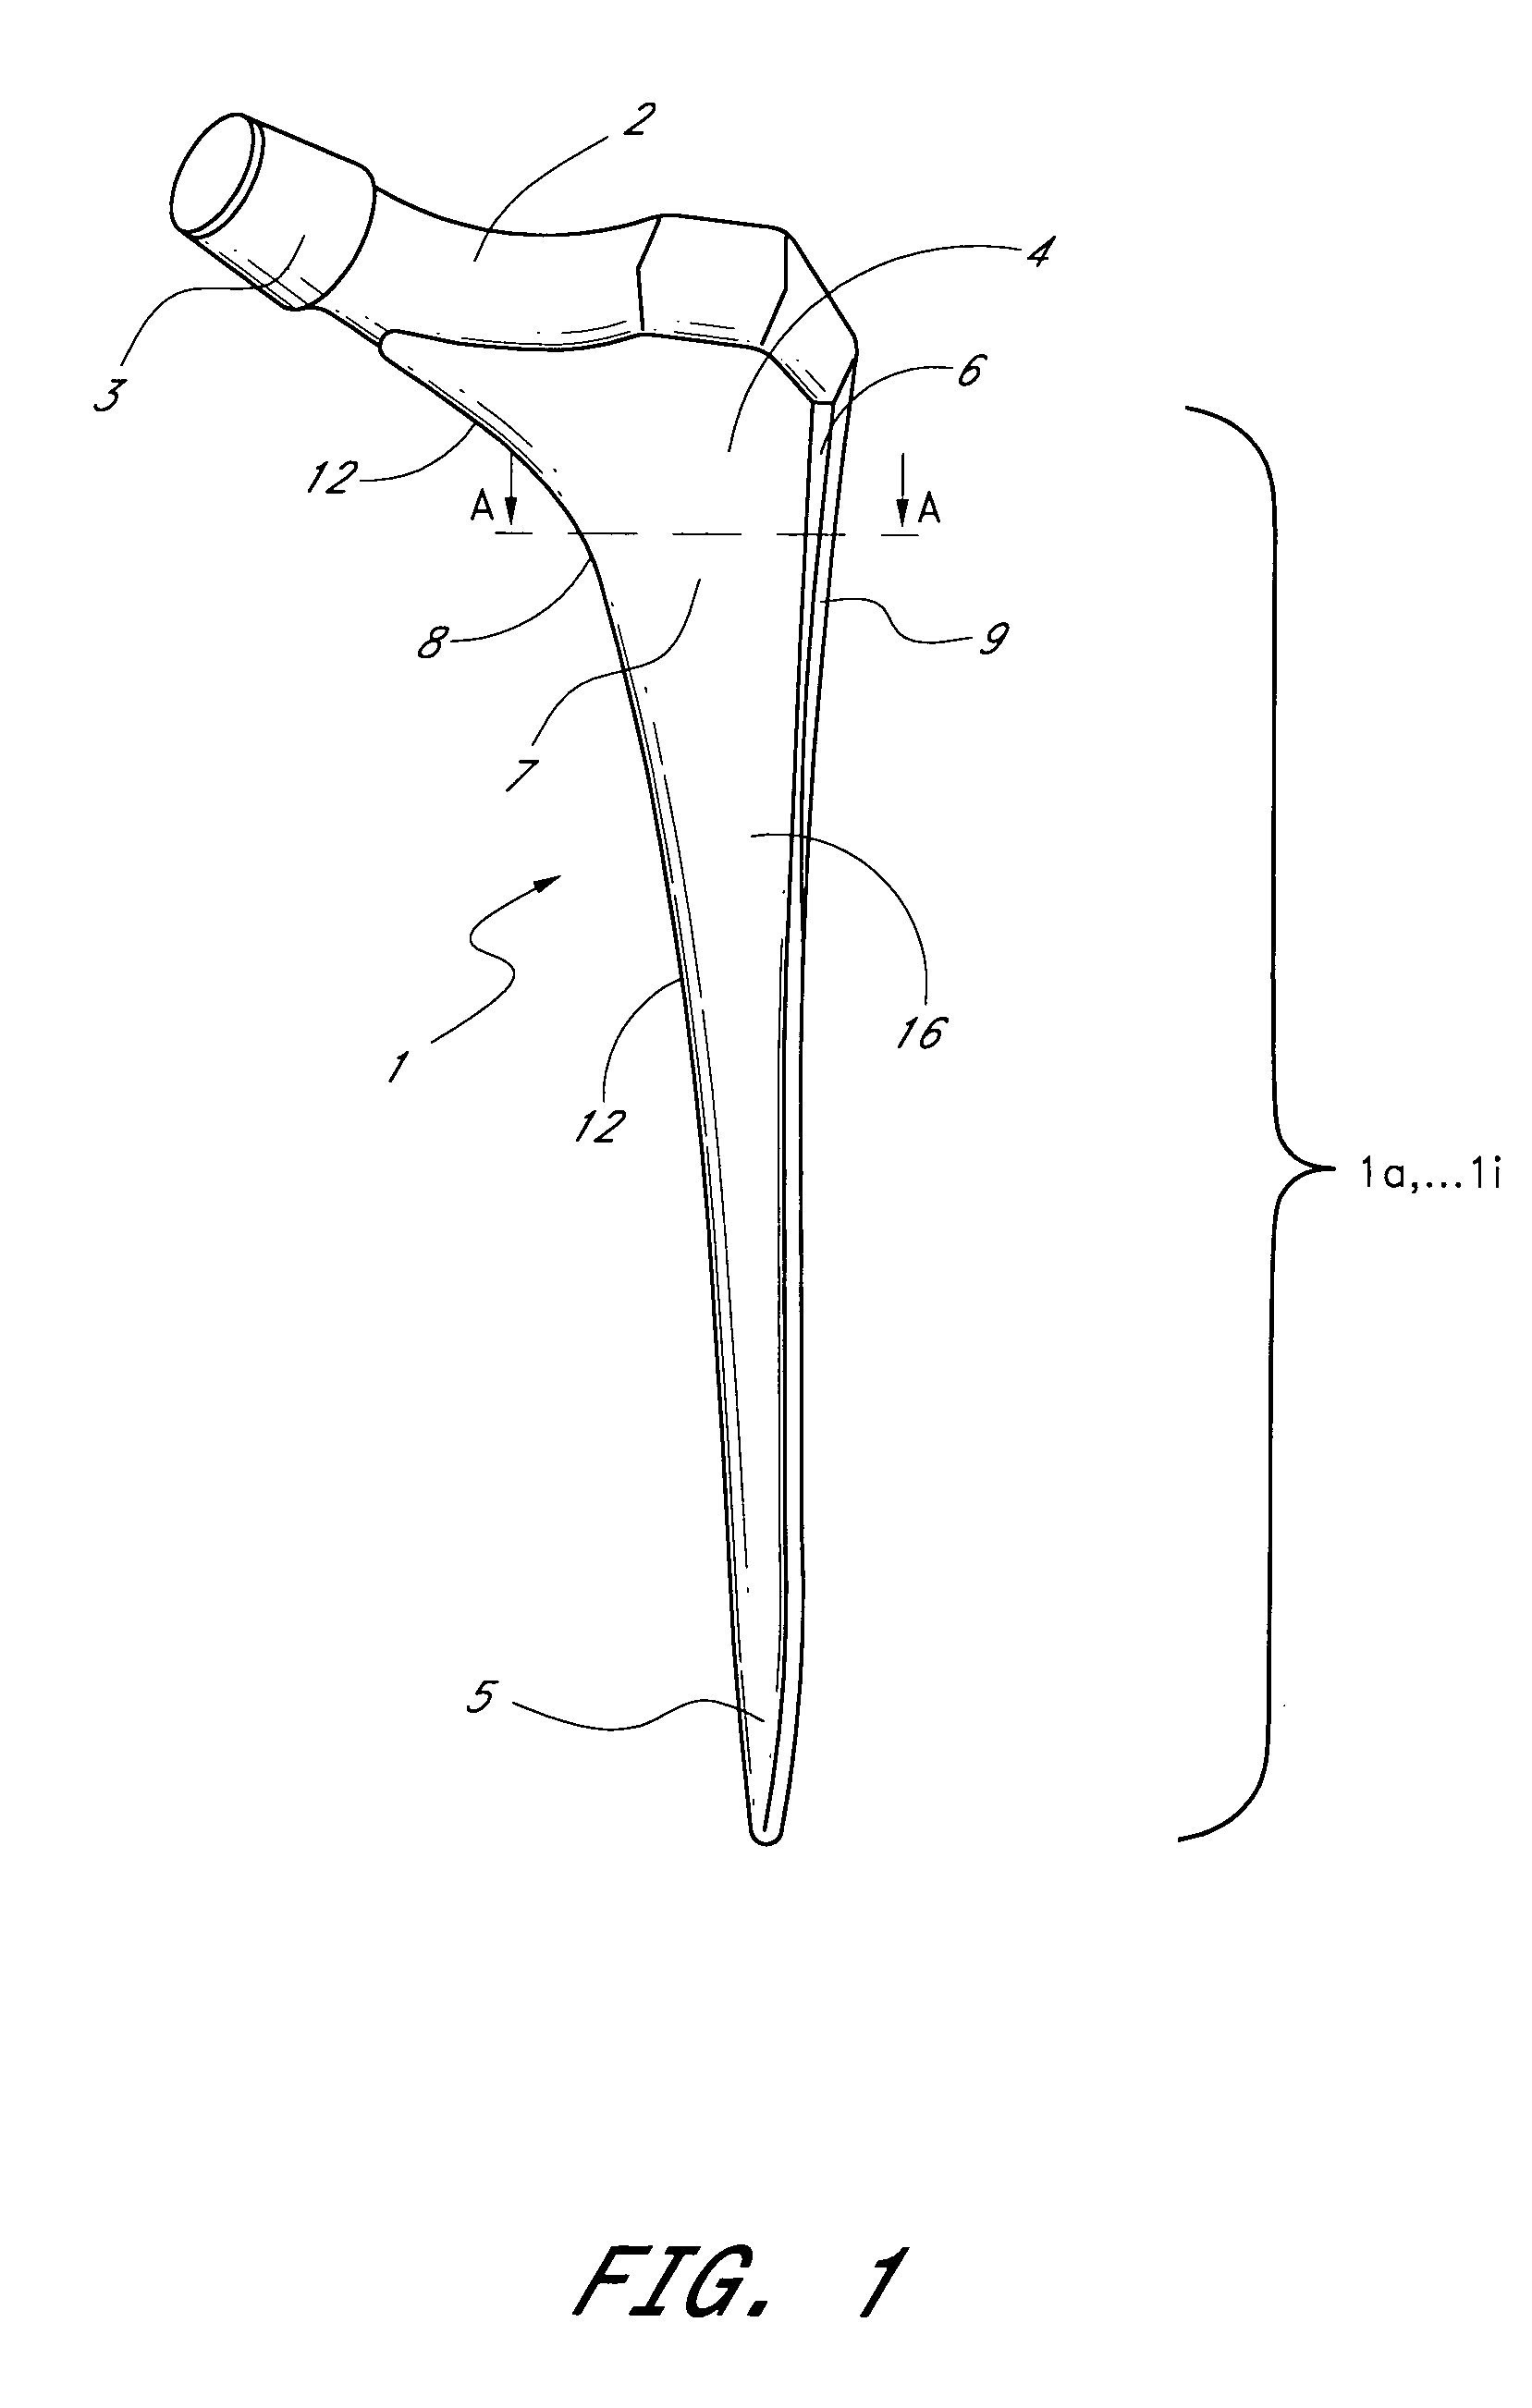 Shaft for anchoring a hip joint prosthesis in the femur